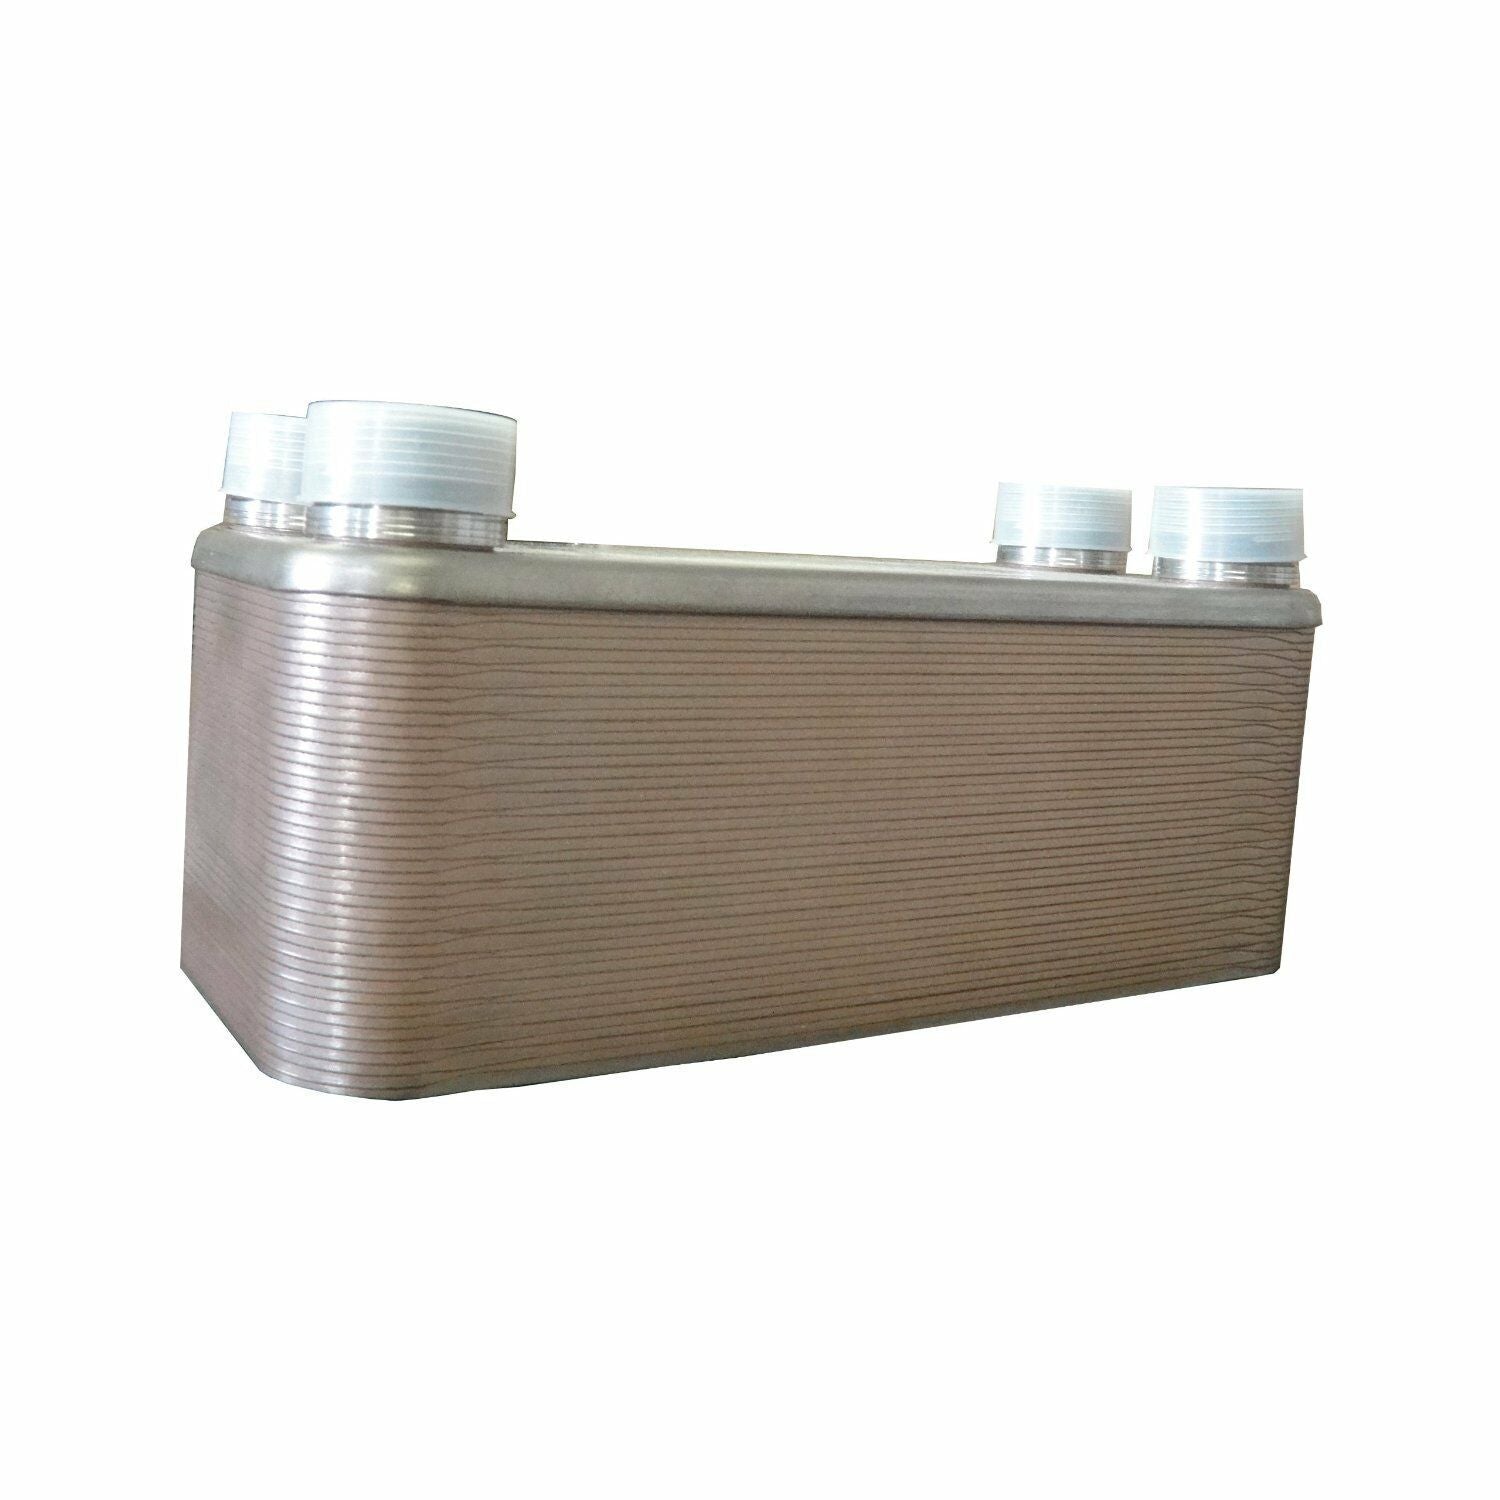 20~100 Plate Brazed Plate Heat Exchanger Water to Water 1" FPT Ports AISI 316L Stainless Steel (5x12"/8x24")